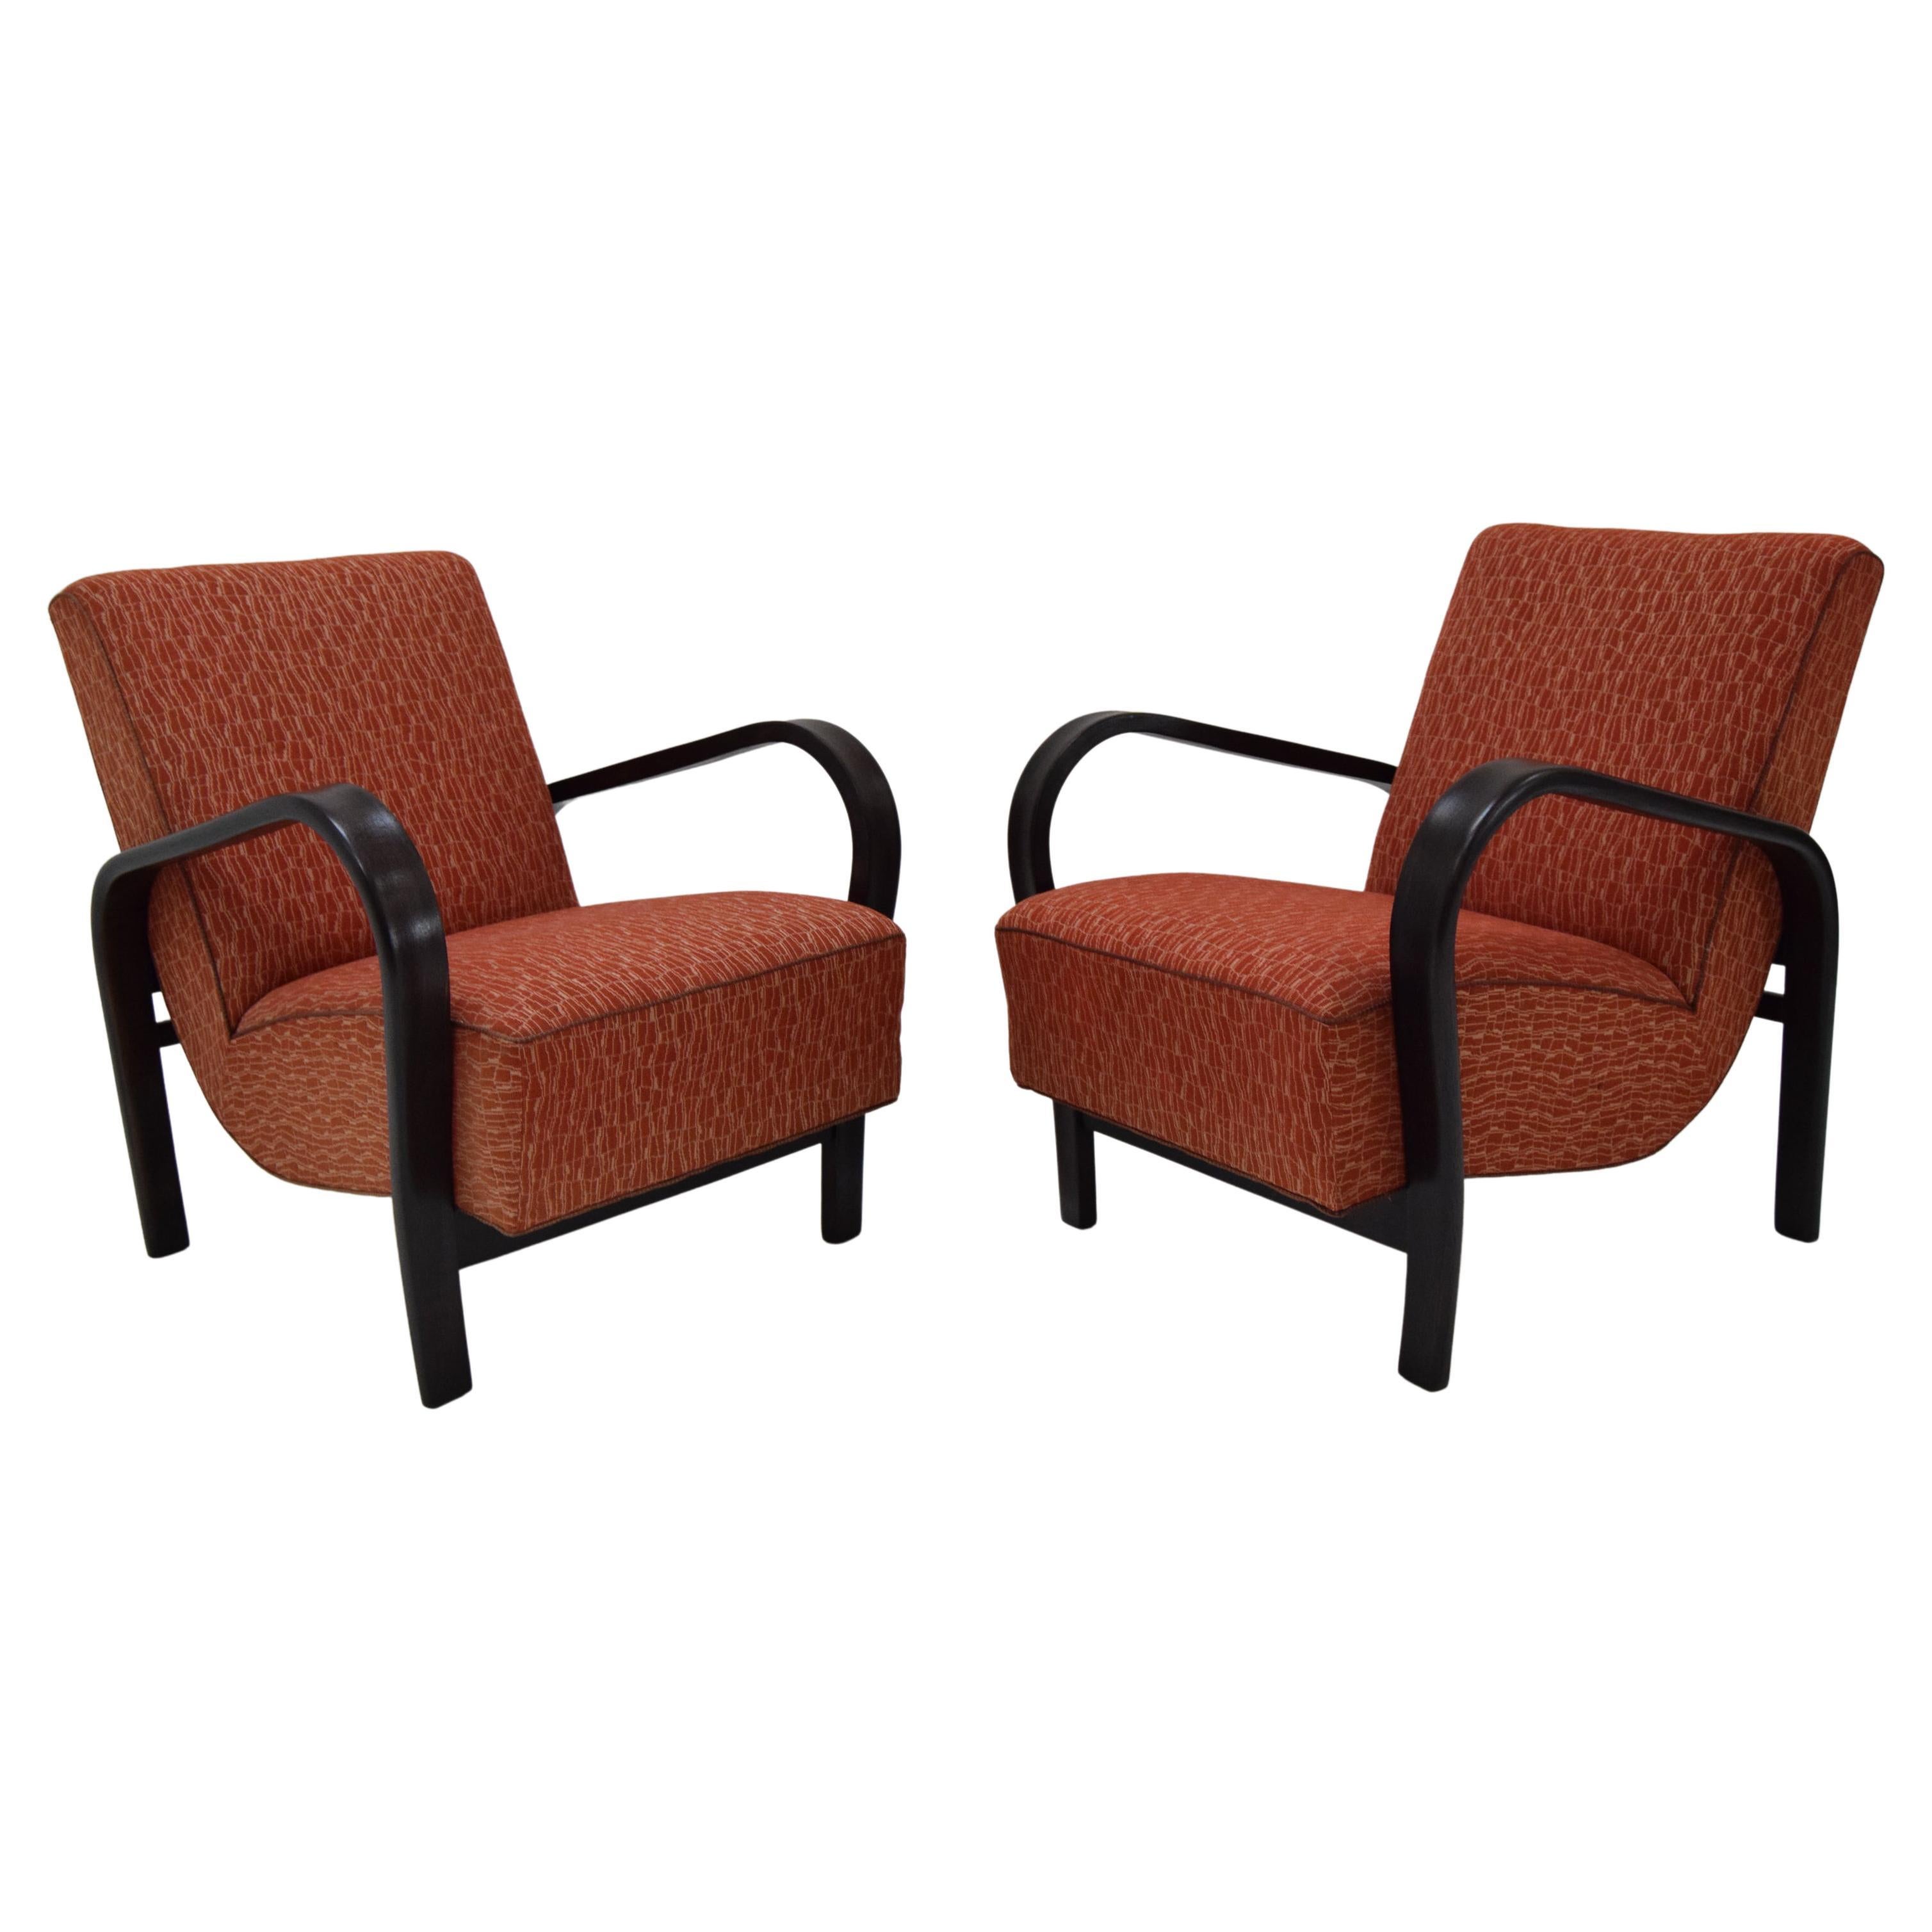 Pair of Art Deco Design Armchairs by Kropacek and Kozelka, 1930's For Sale